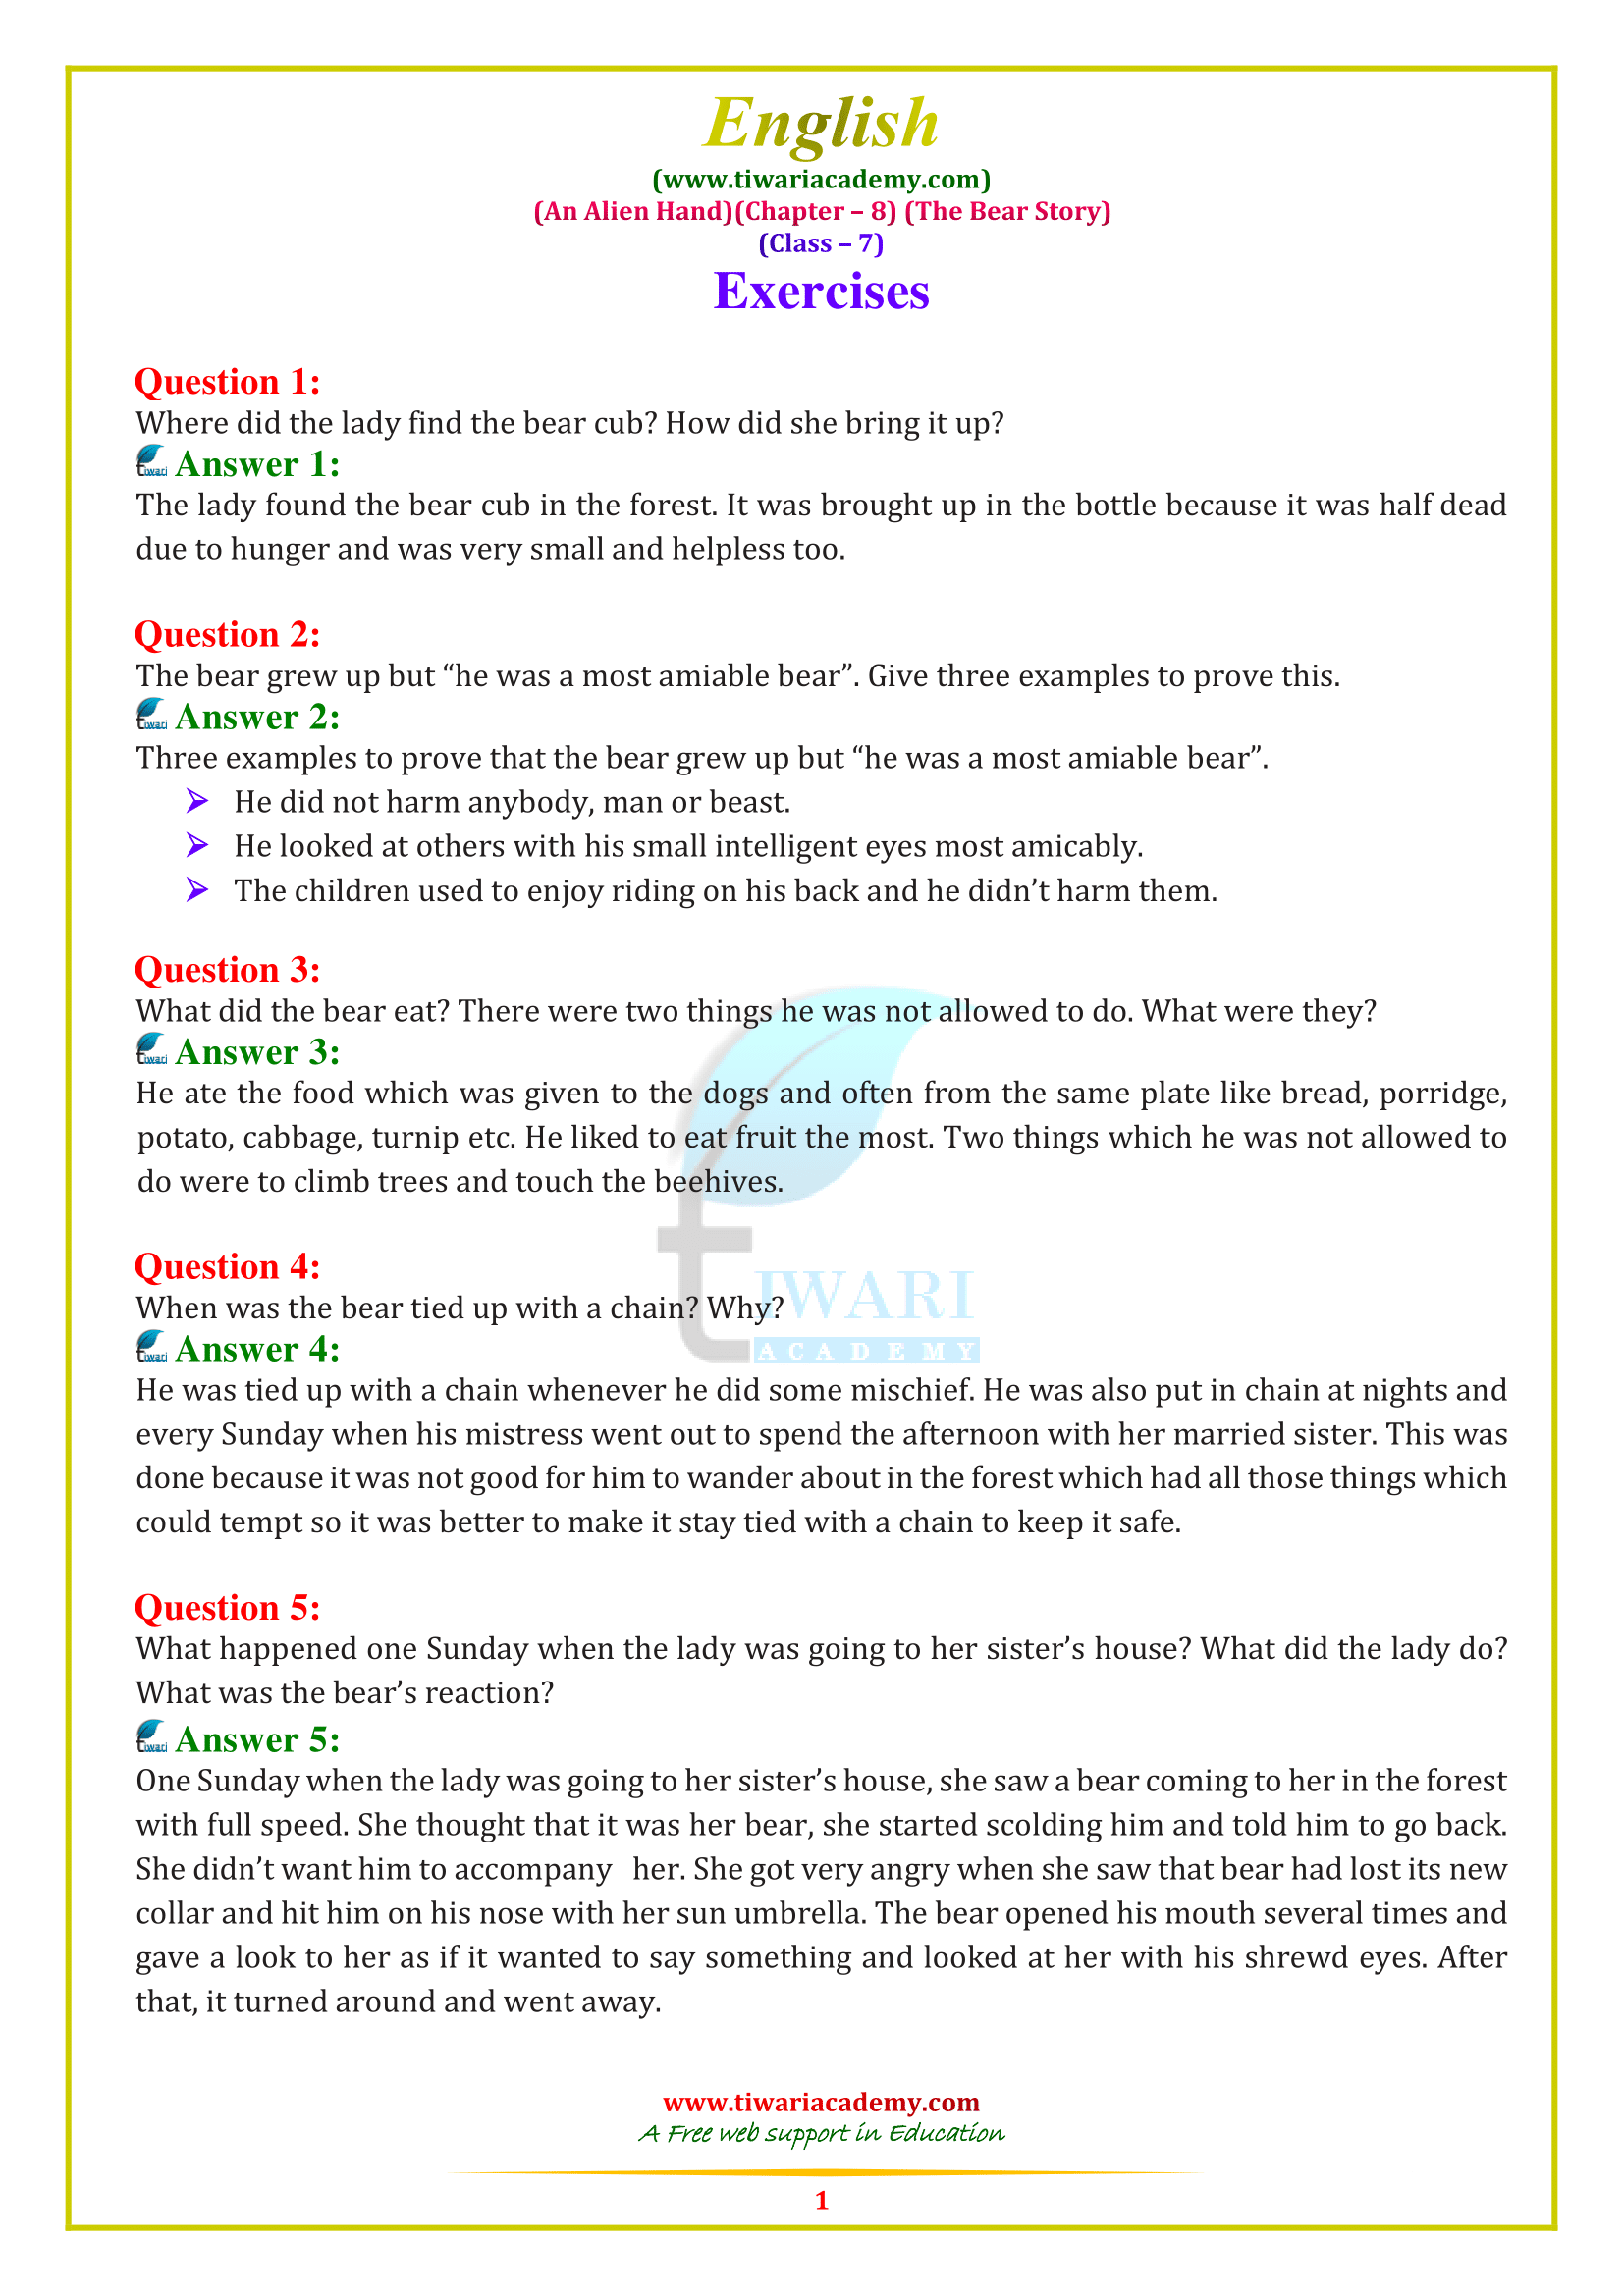 Class 7 English Chapter 8: The Bear Story - Answers